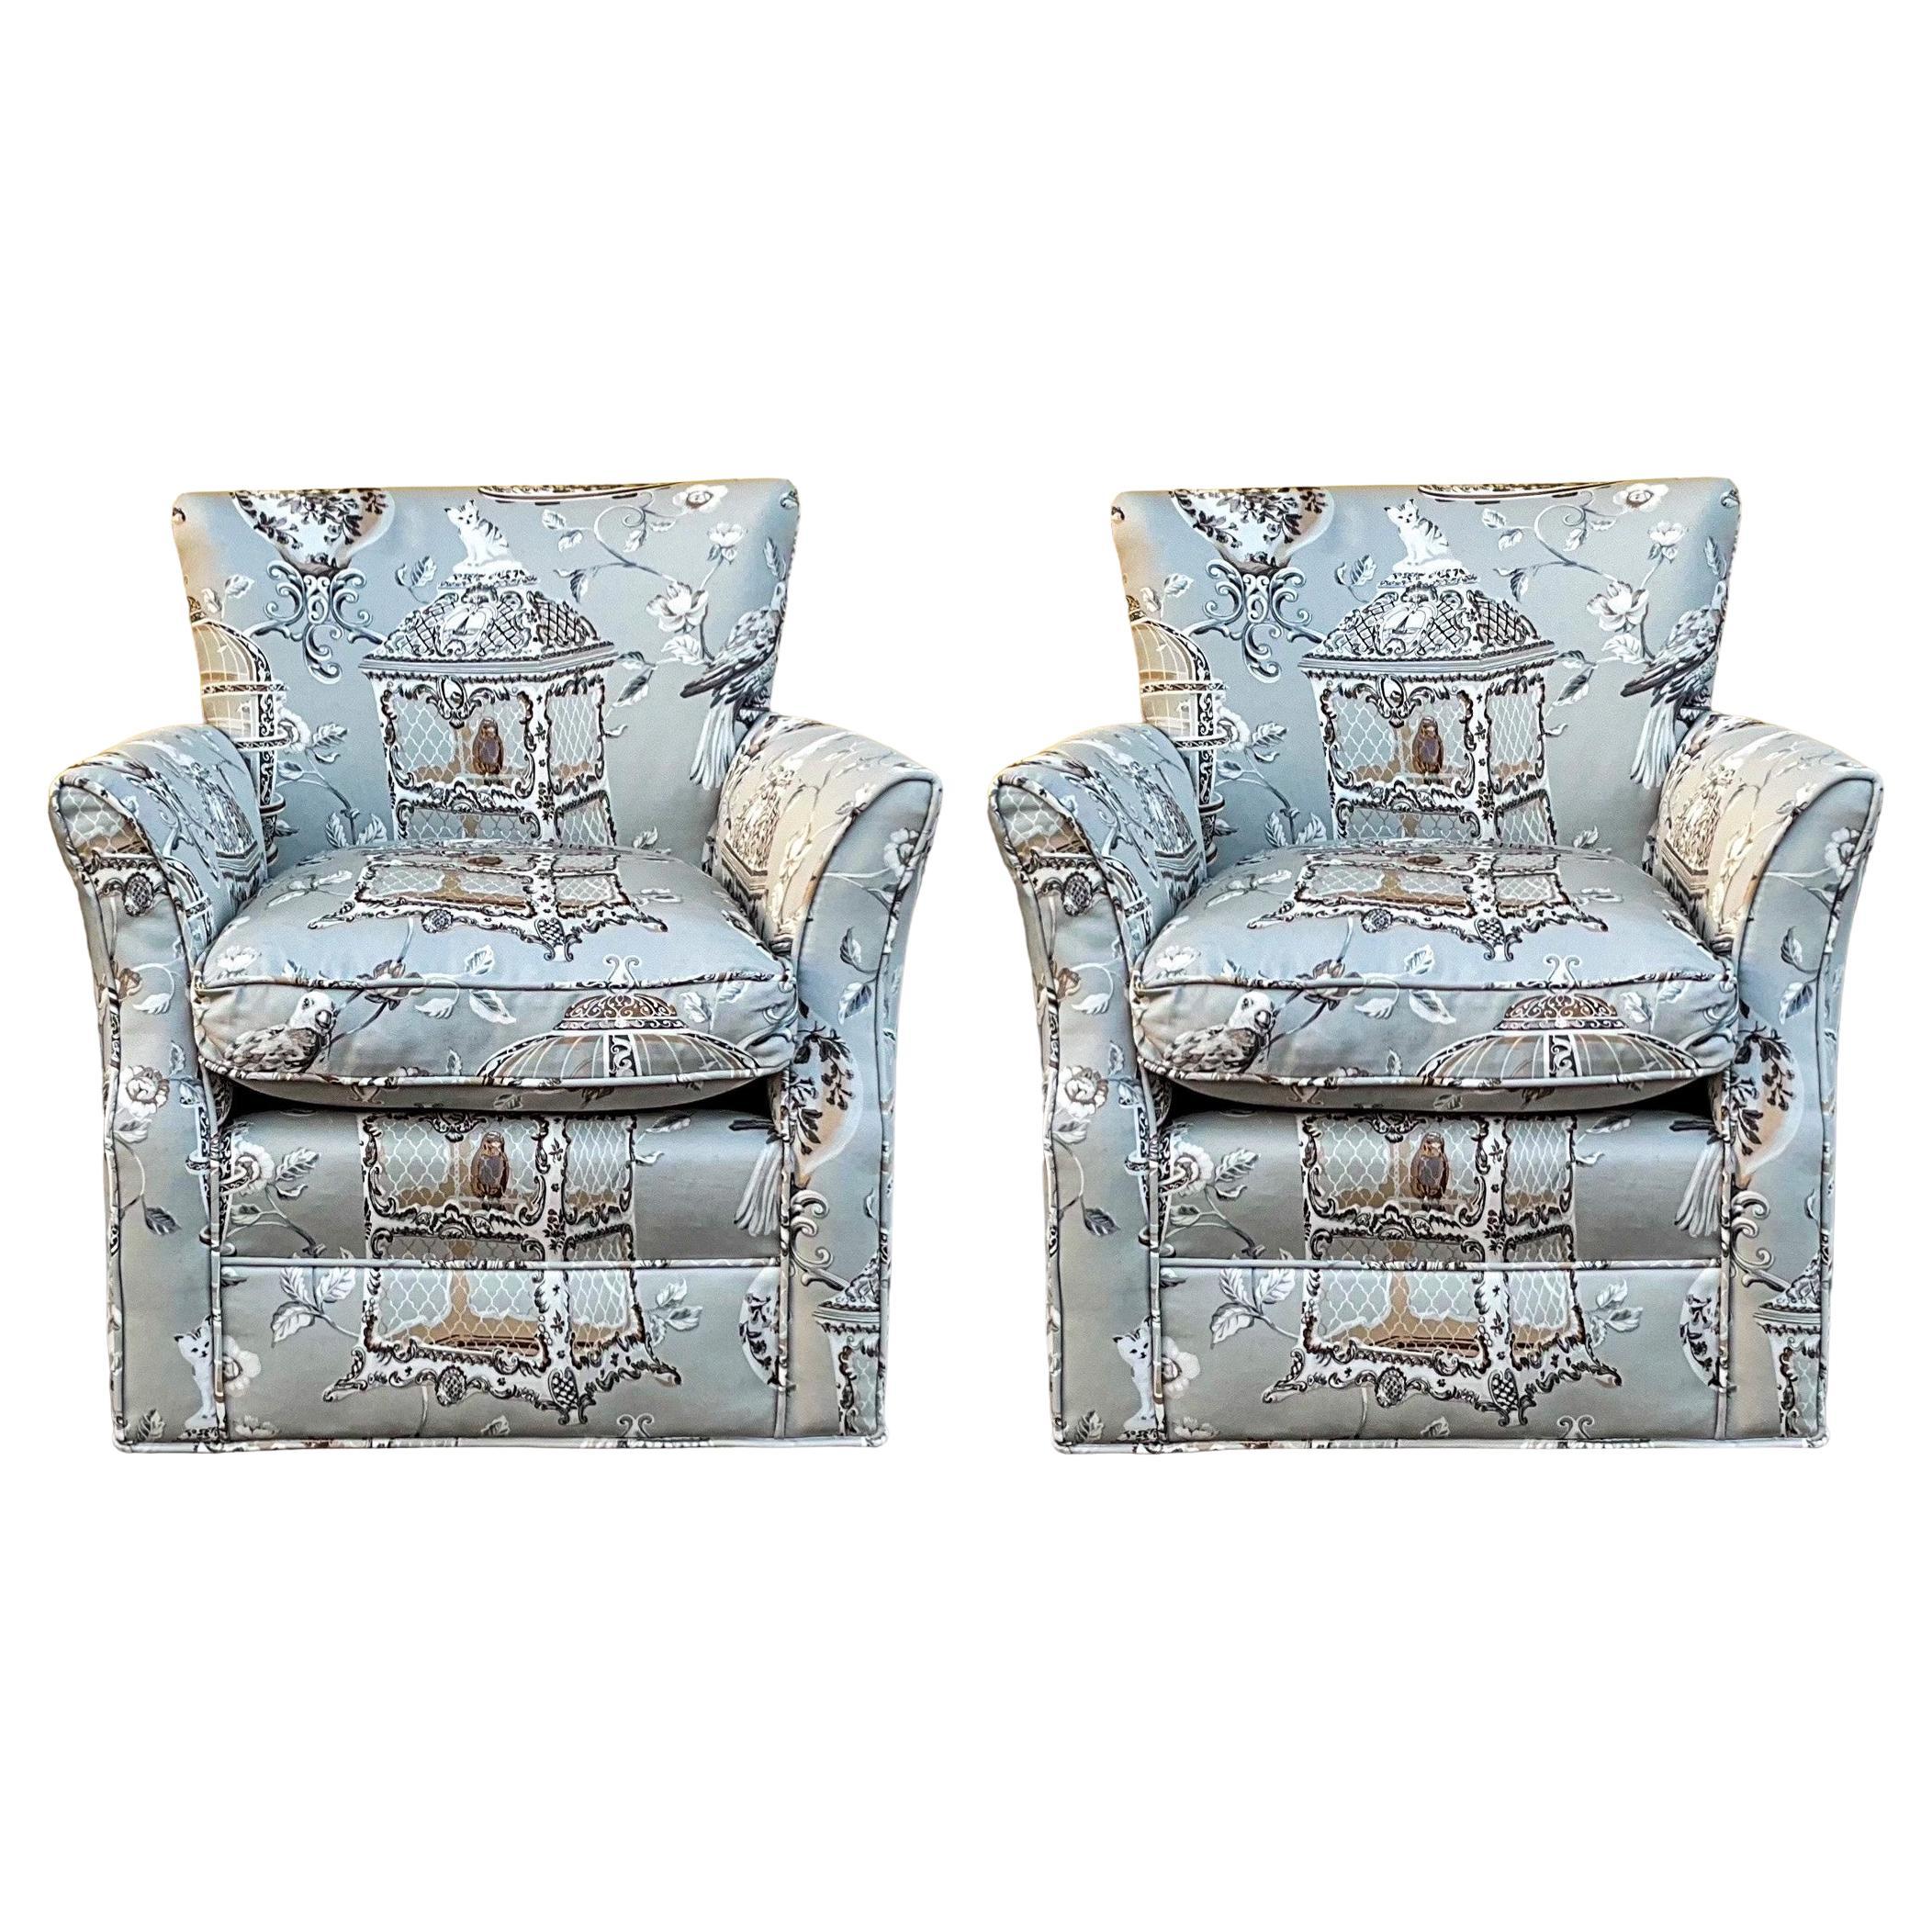 1940s French Children’s Wingback Chairs In Cat & Birdcage Toile / Chintz - Pair For Sale